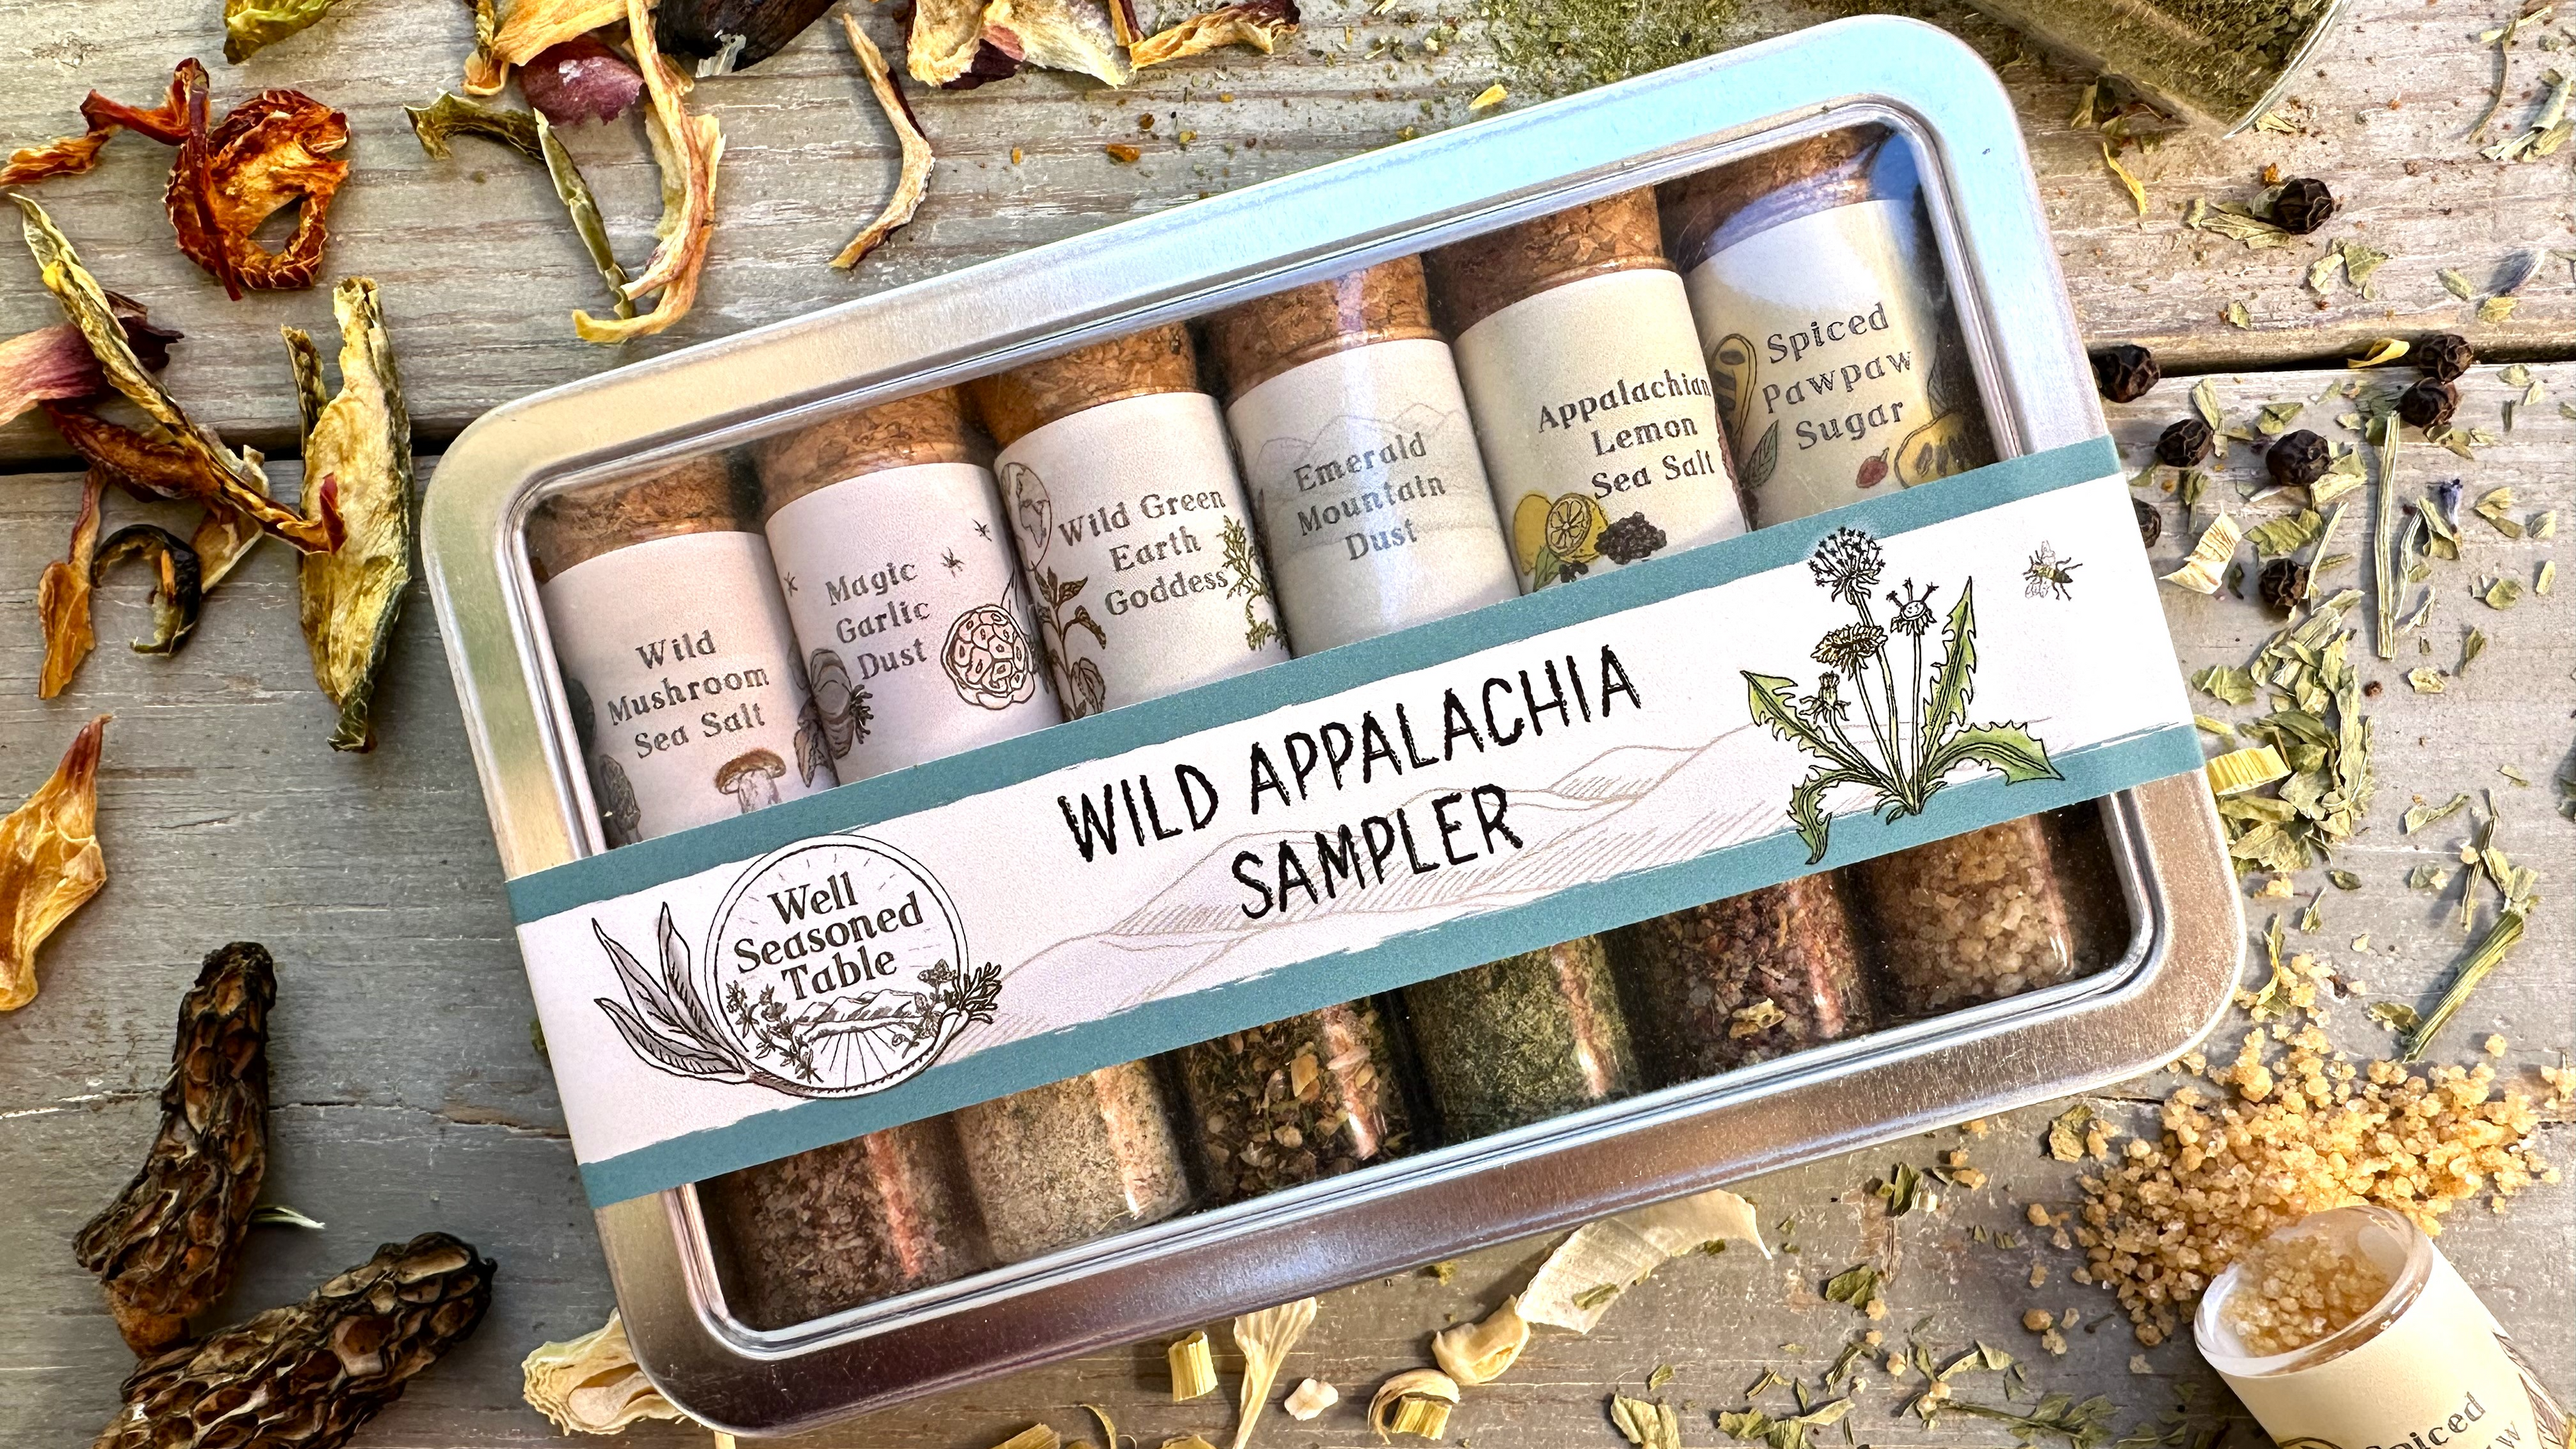 A sampler tin of vials of spices from Well Seasoned Table on a wooden background with organic dried spices around it.